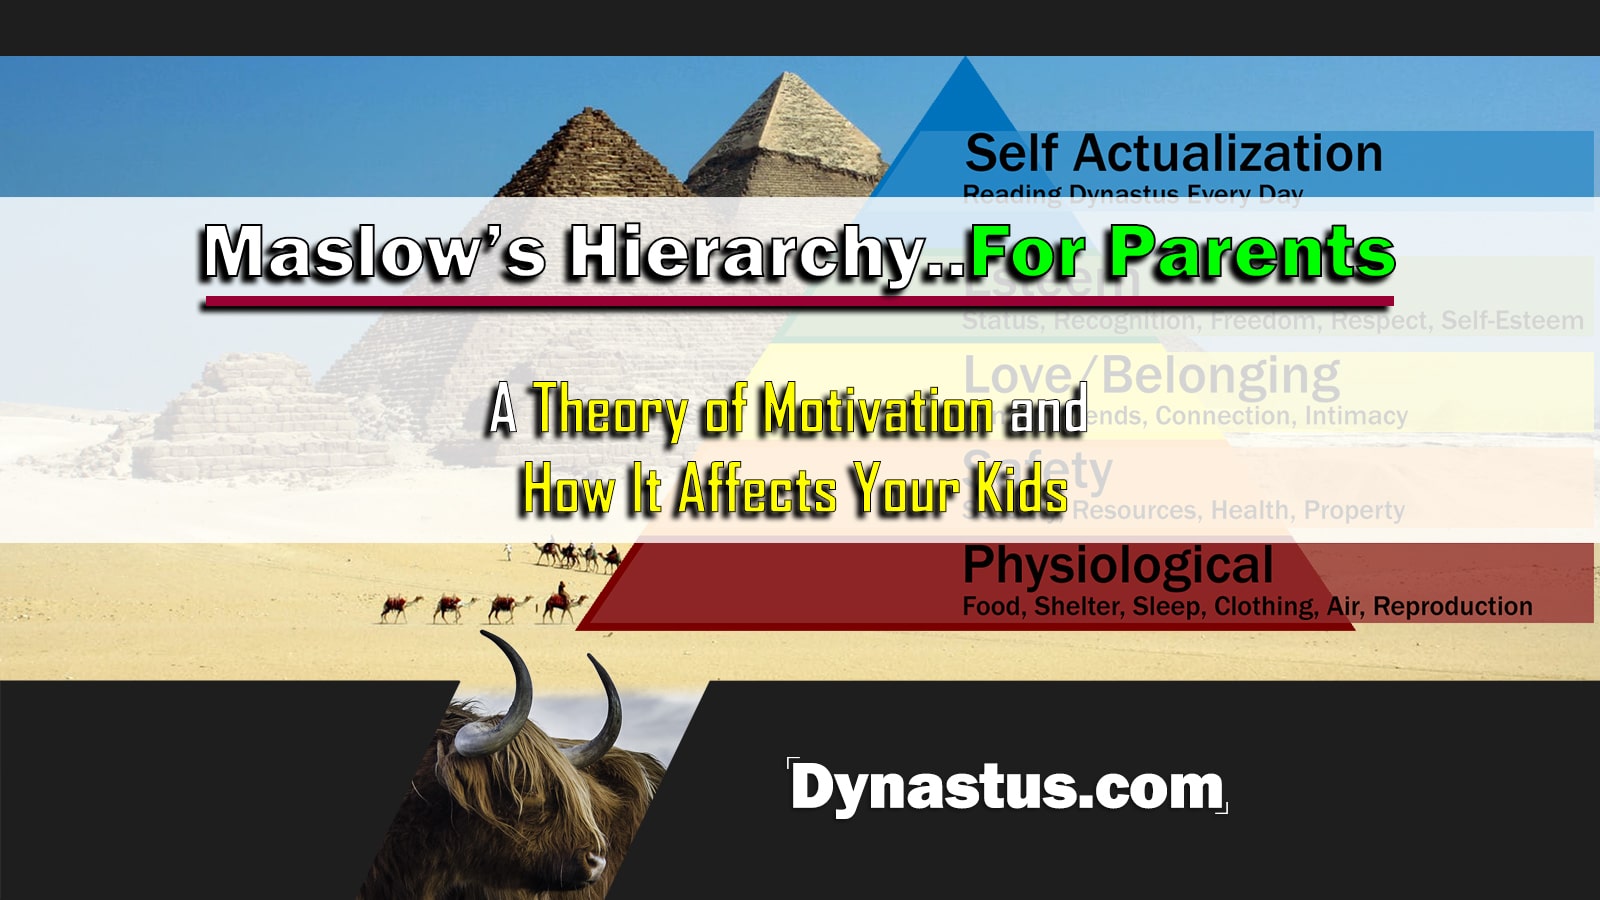 Maslows Hierarchy of Needs For Parents